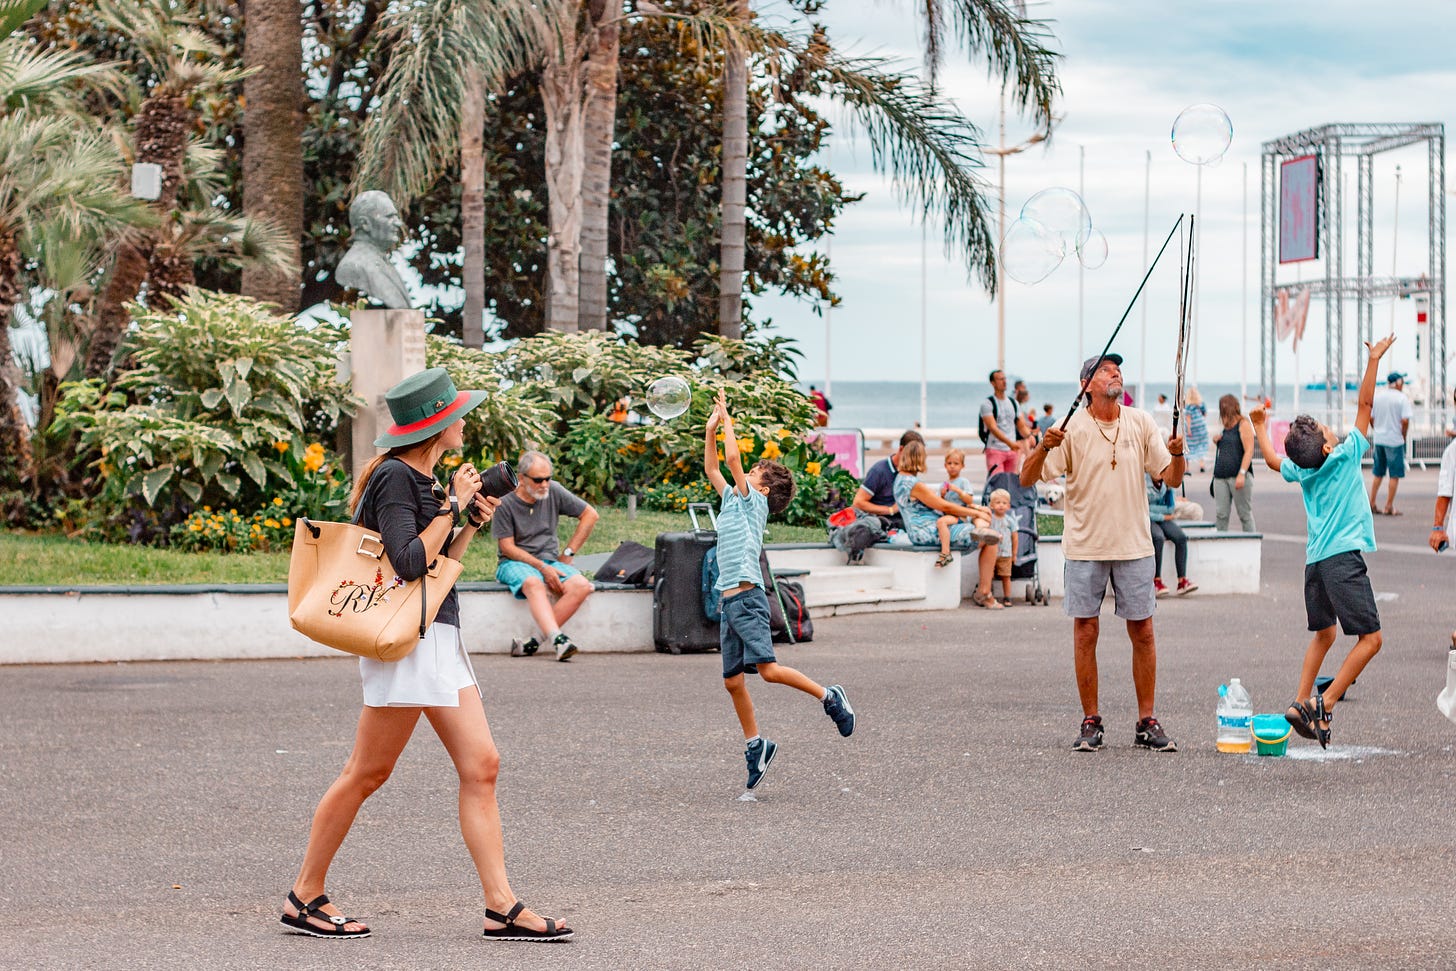 People strolling, resting and kids playing at the park in Nice: A photo by David Elikwu 